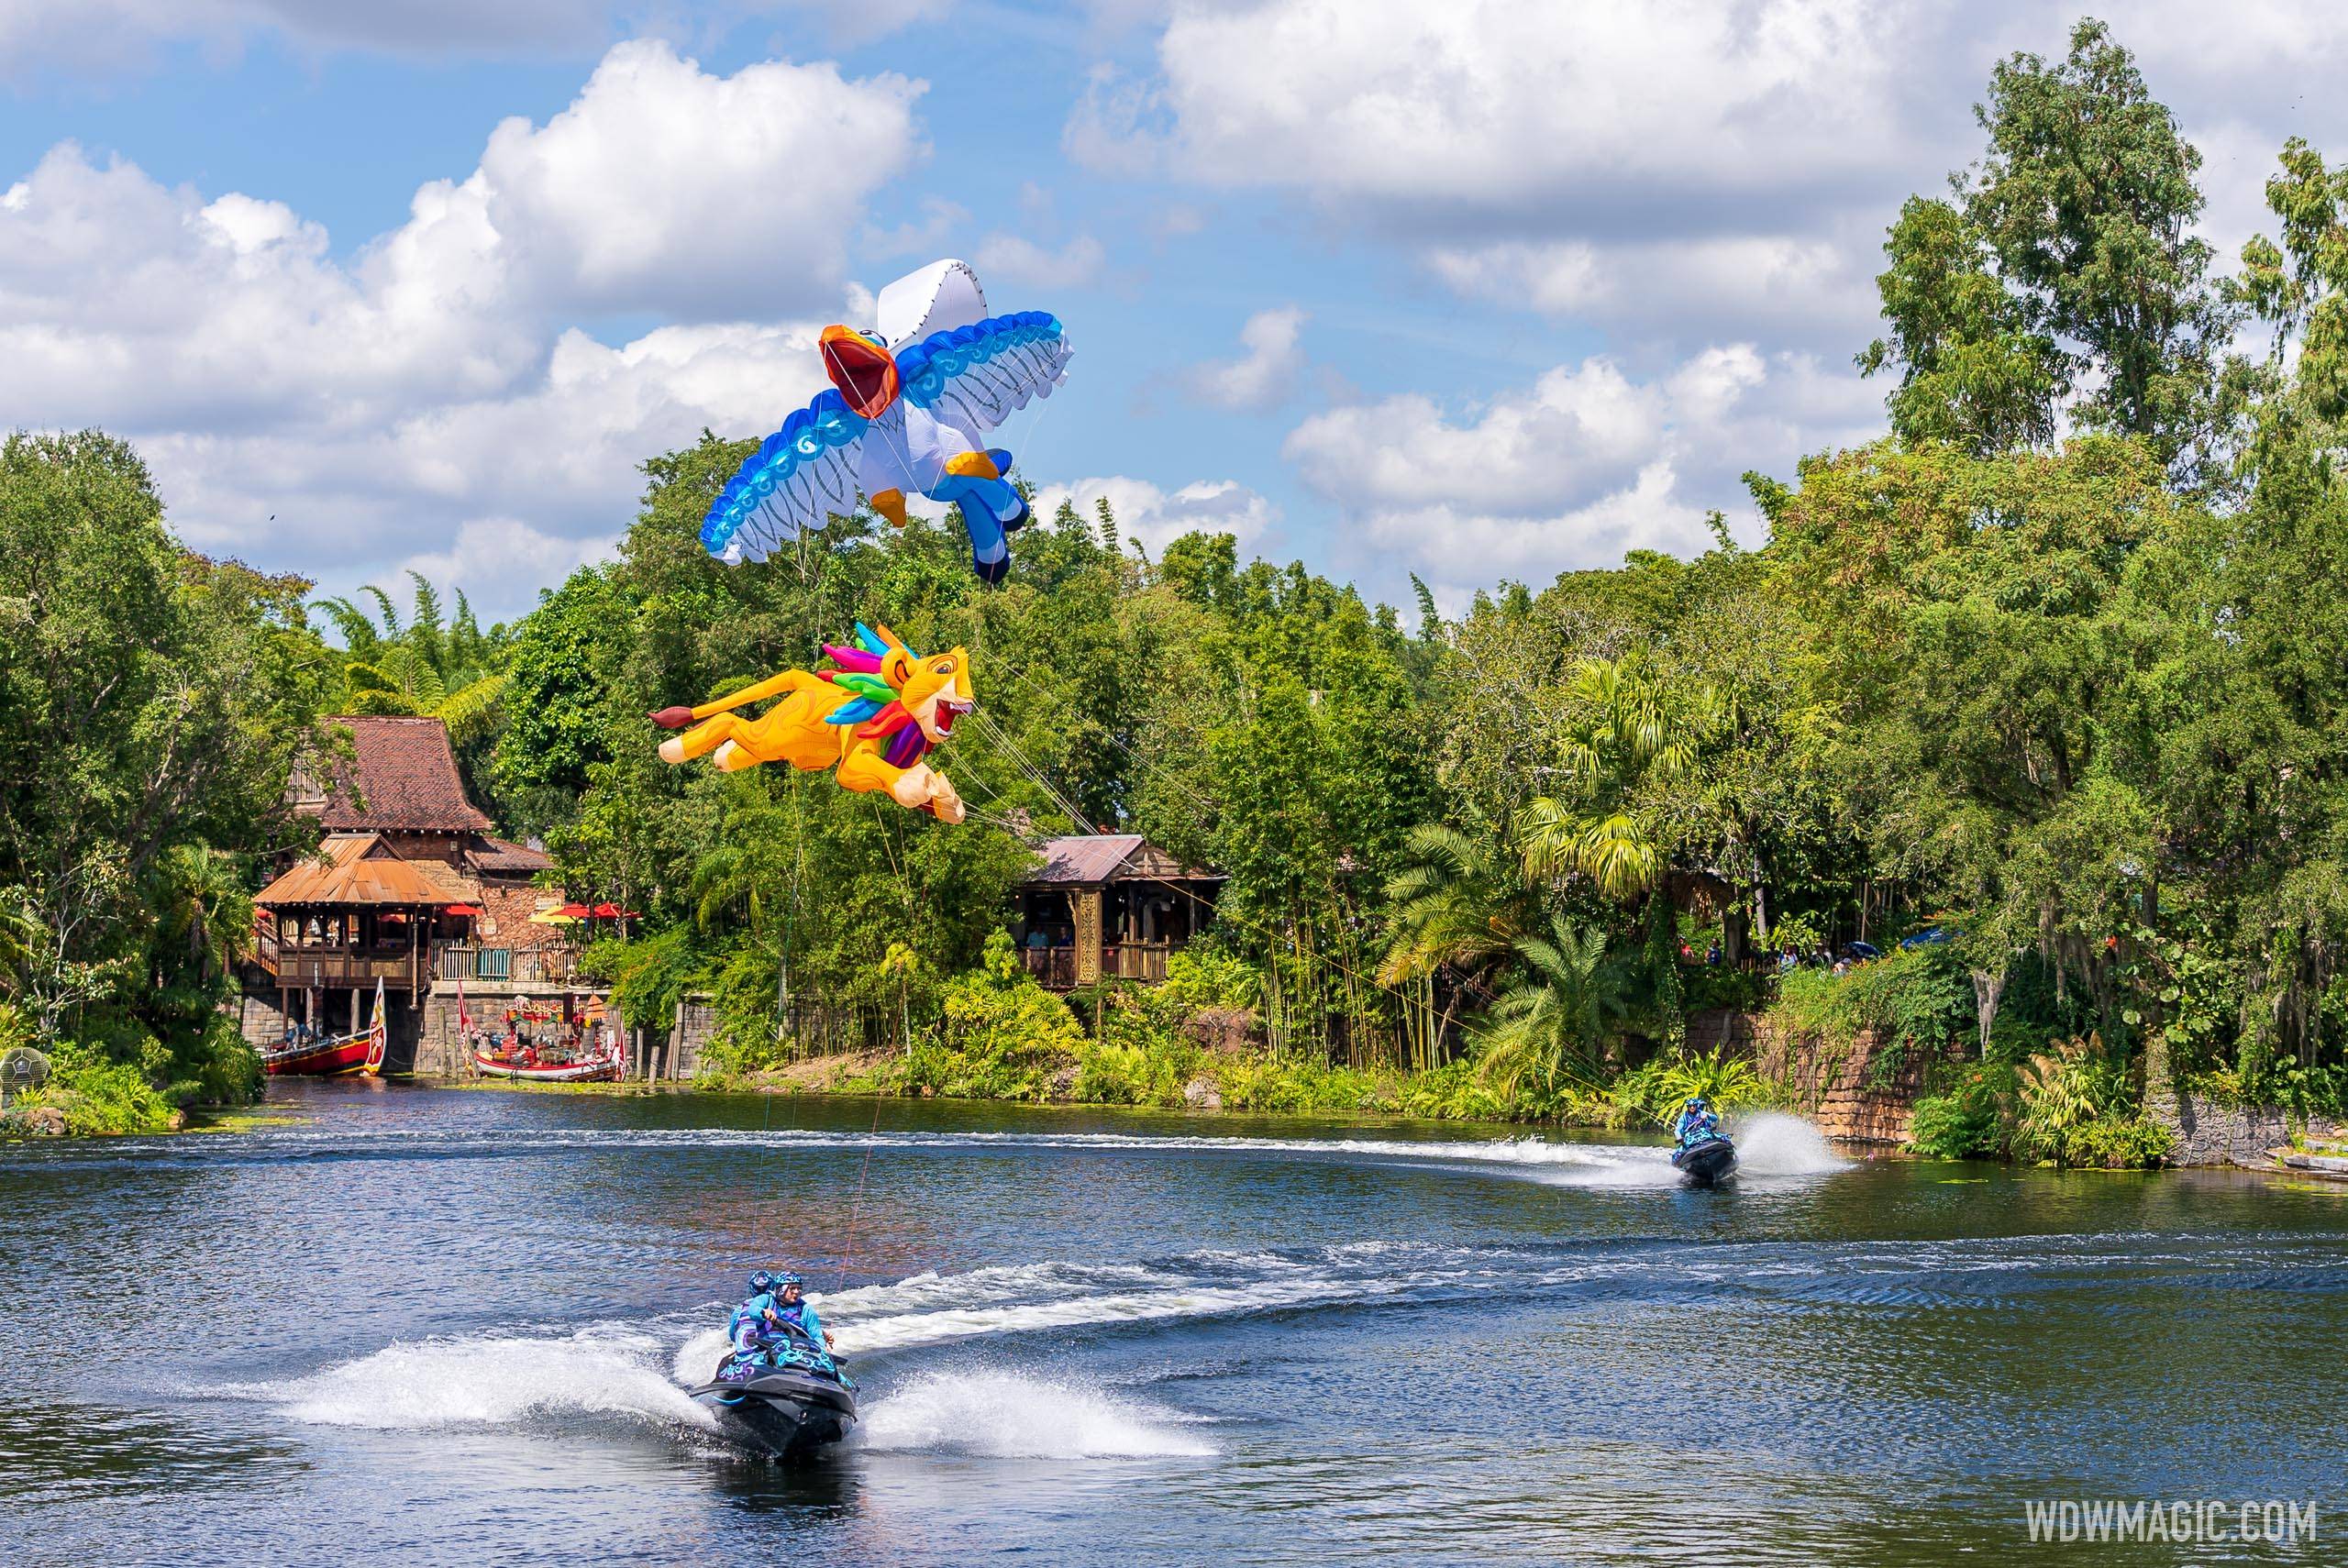 Disney KiteTails daytime show flying into Disney's Animal Kingdom for the 50th anniversary